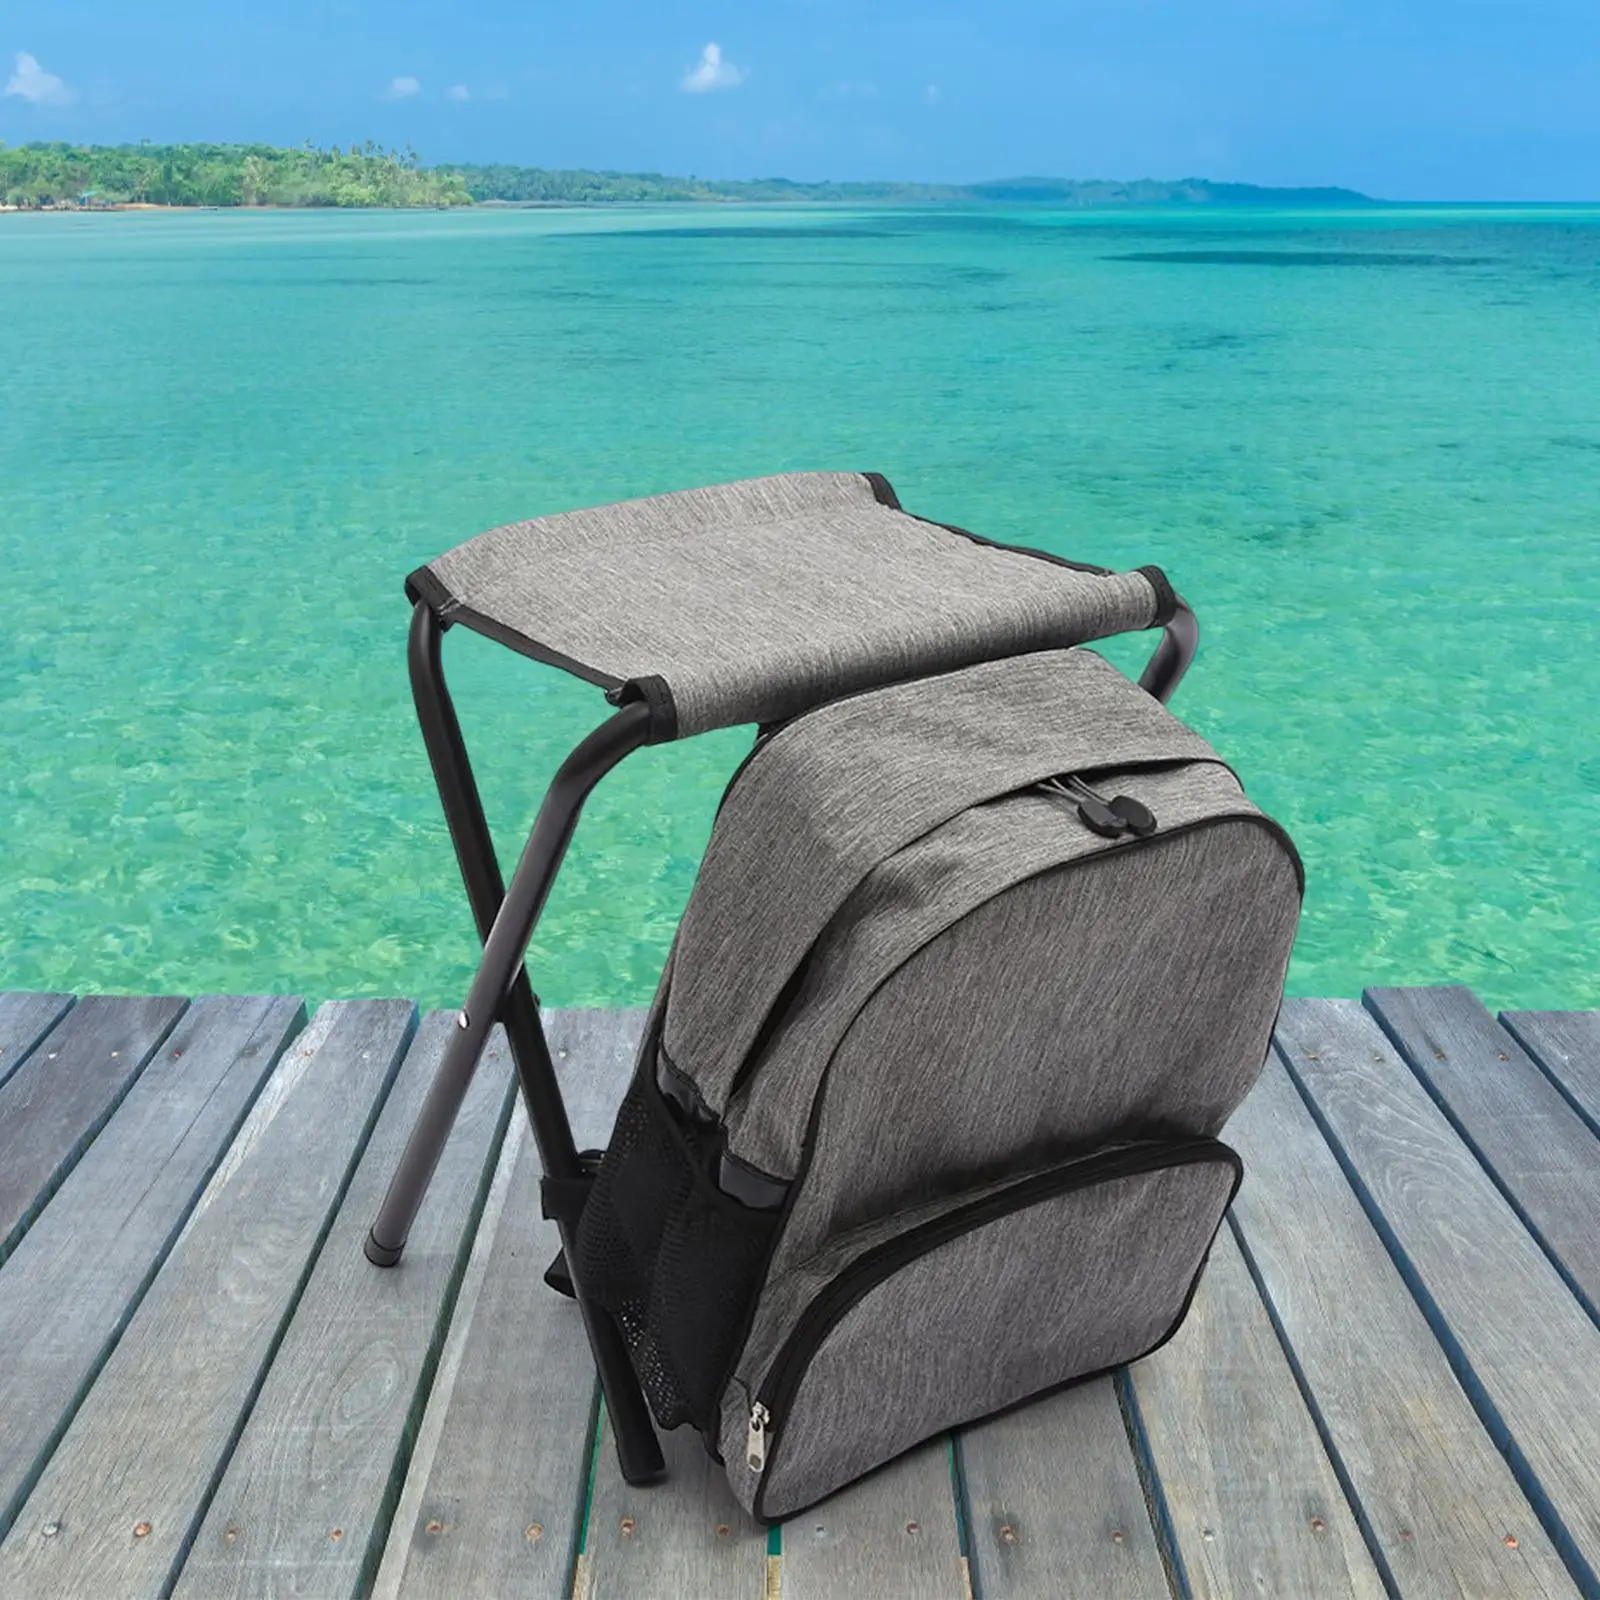 Fishing Seat Compact Camp Stool Multifunction Detachable Backpack Folding Stool with Bag for Hiking Beach BBQ Gardening Travel